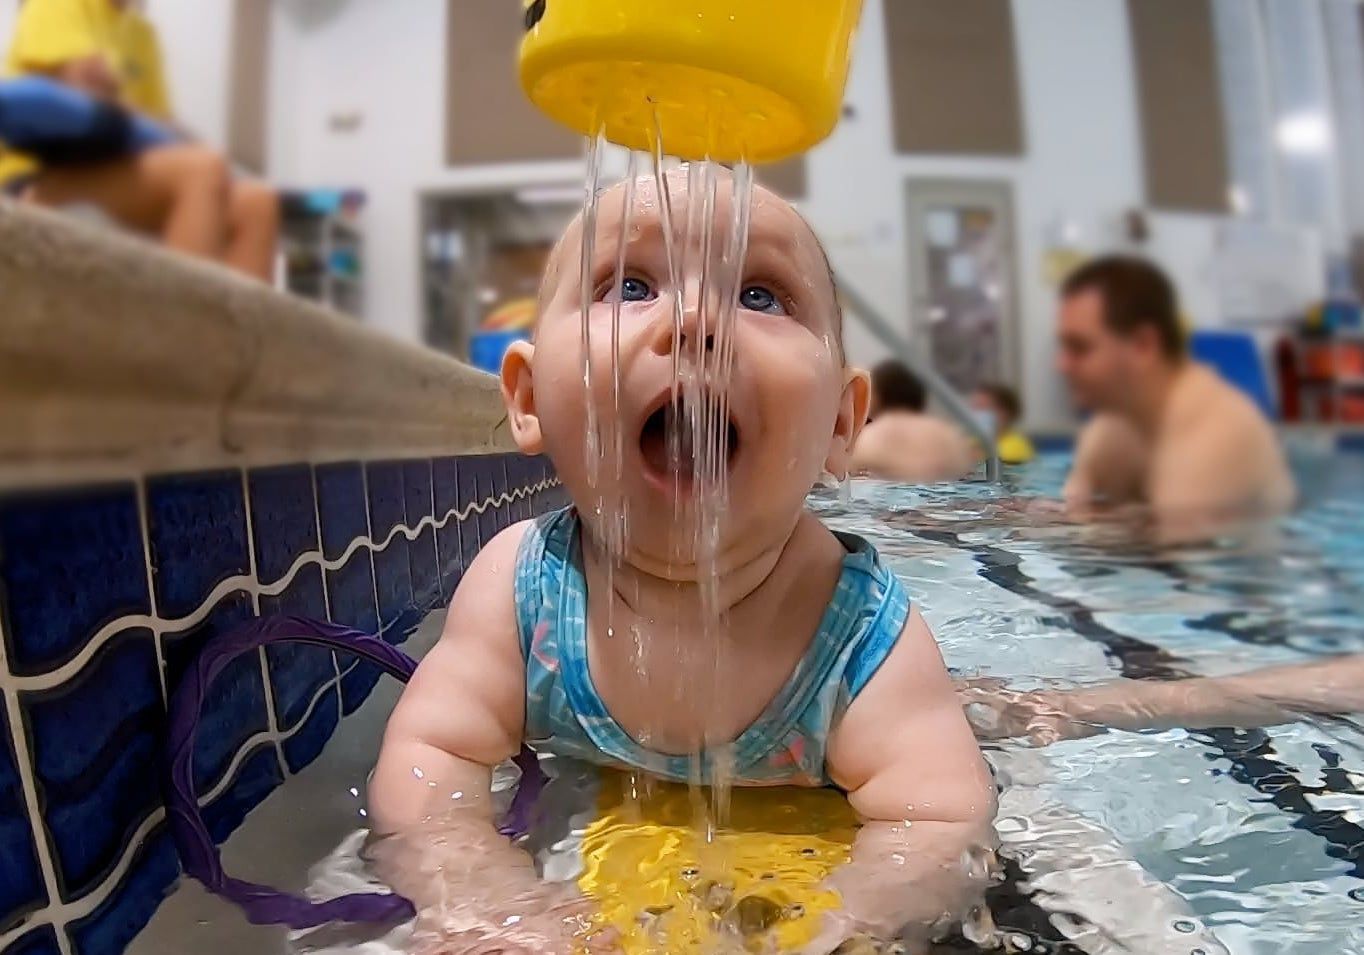 A baby is drinking water from a yellow bucket in a swimming pool.